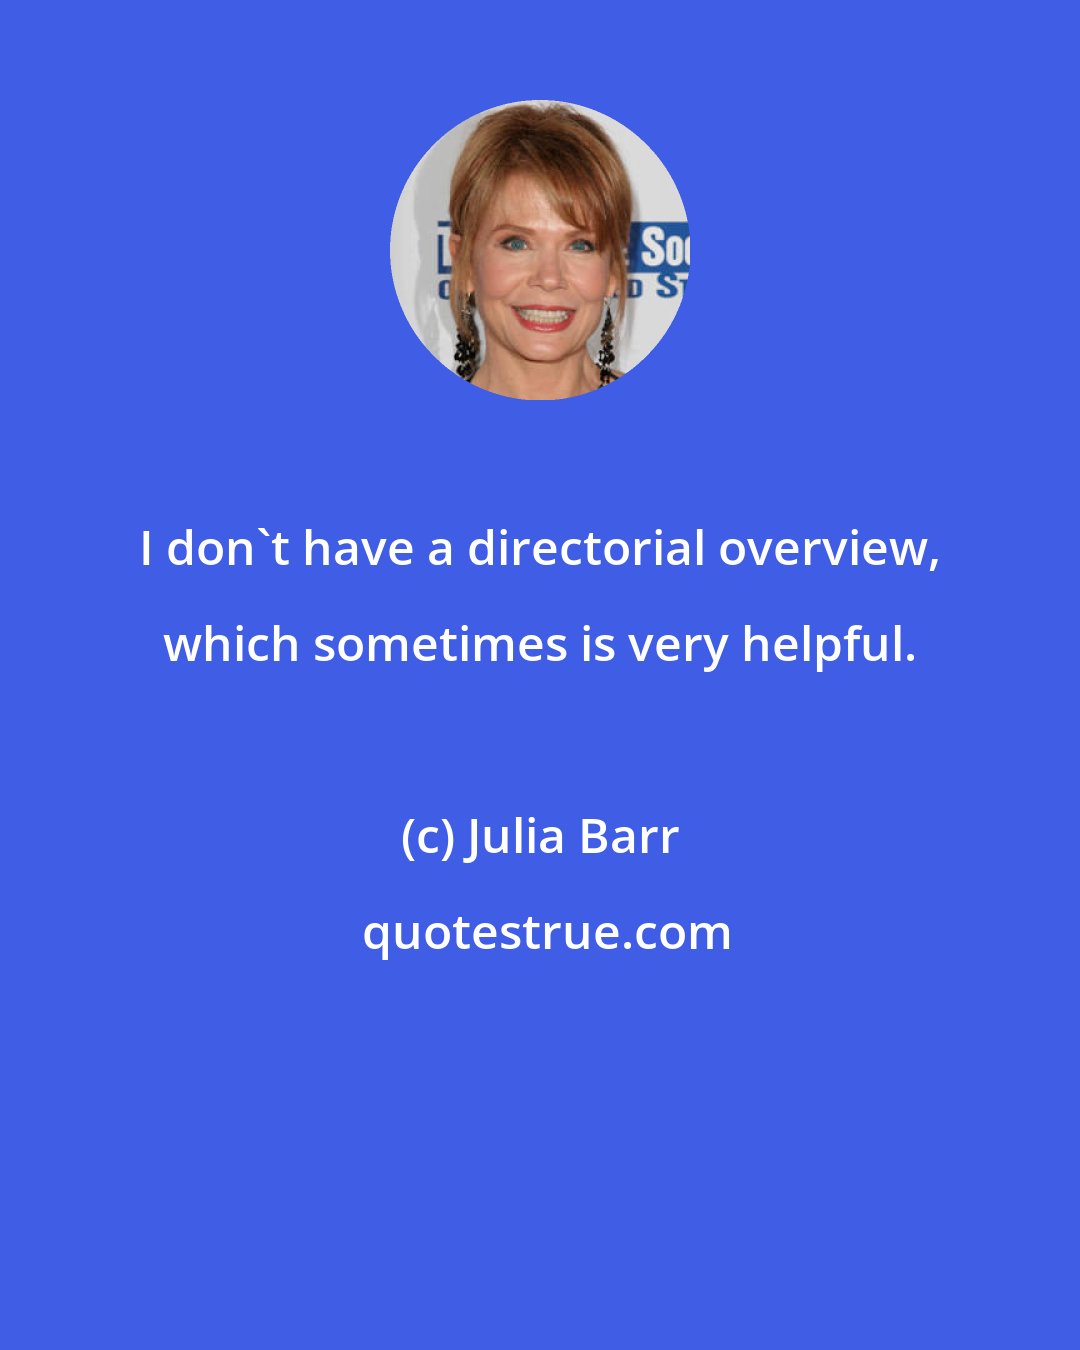 Julia Barr: I don't have a directorial overview, which sometimes is very helpful.